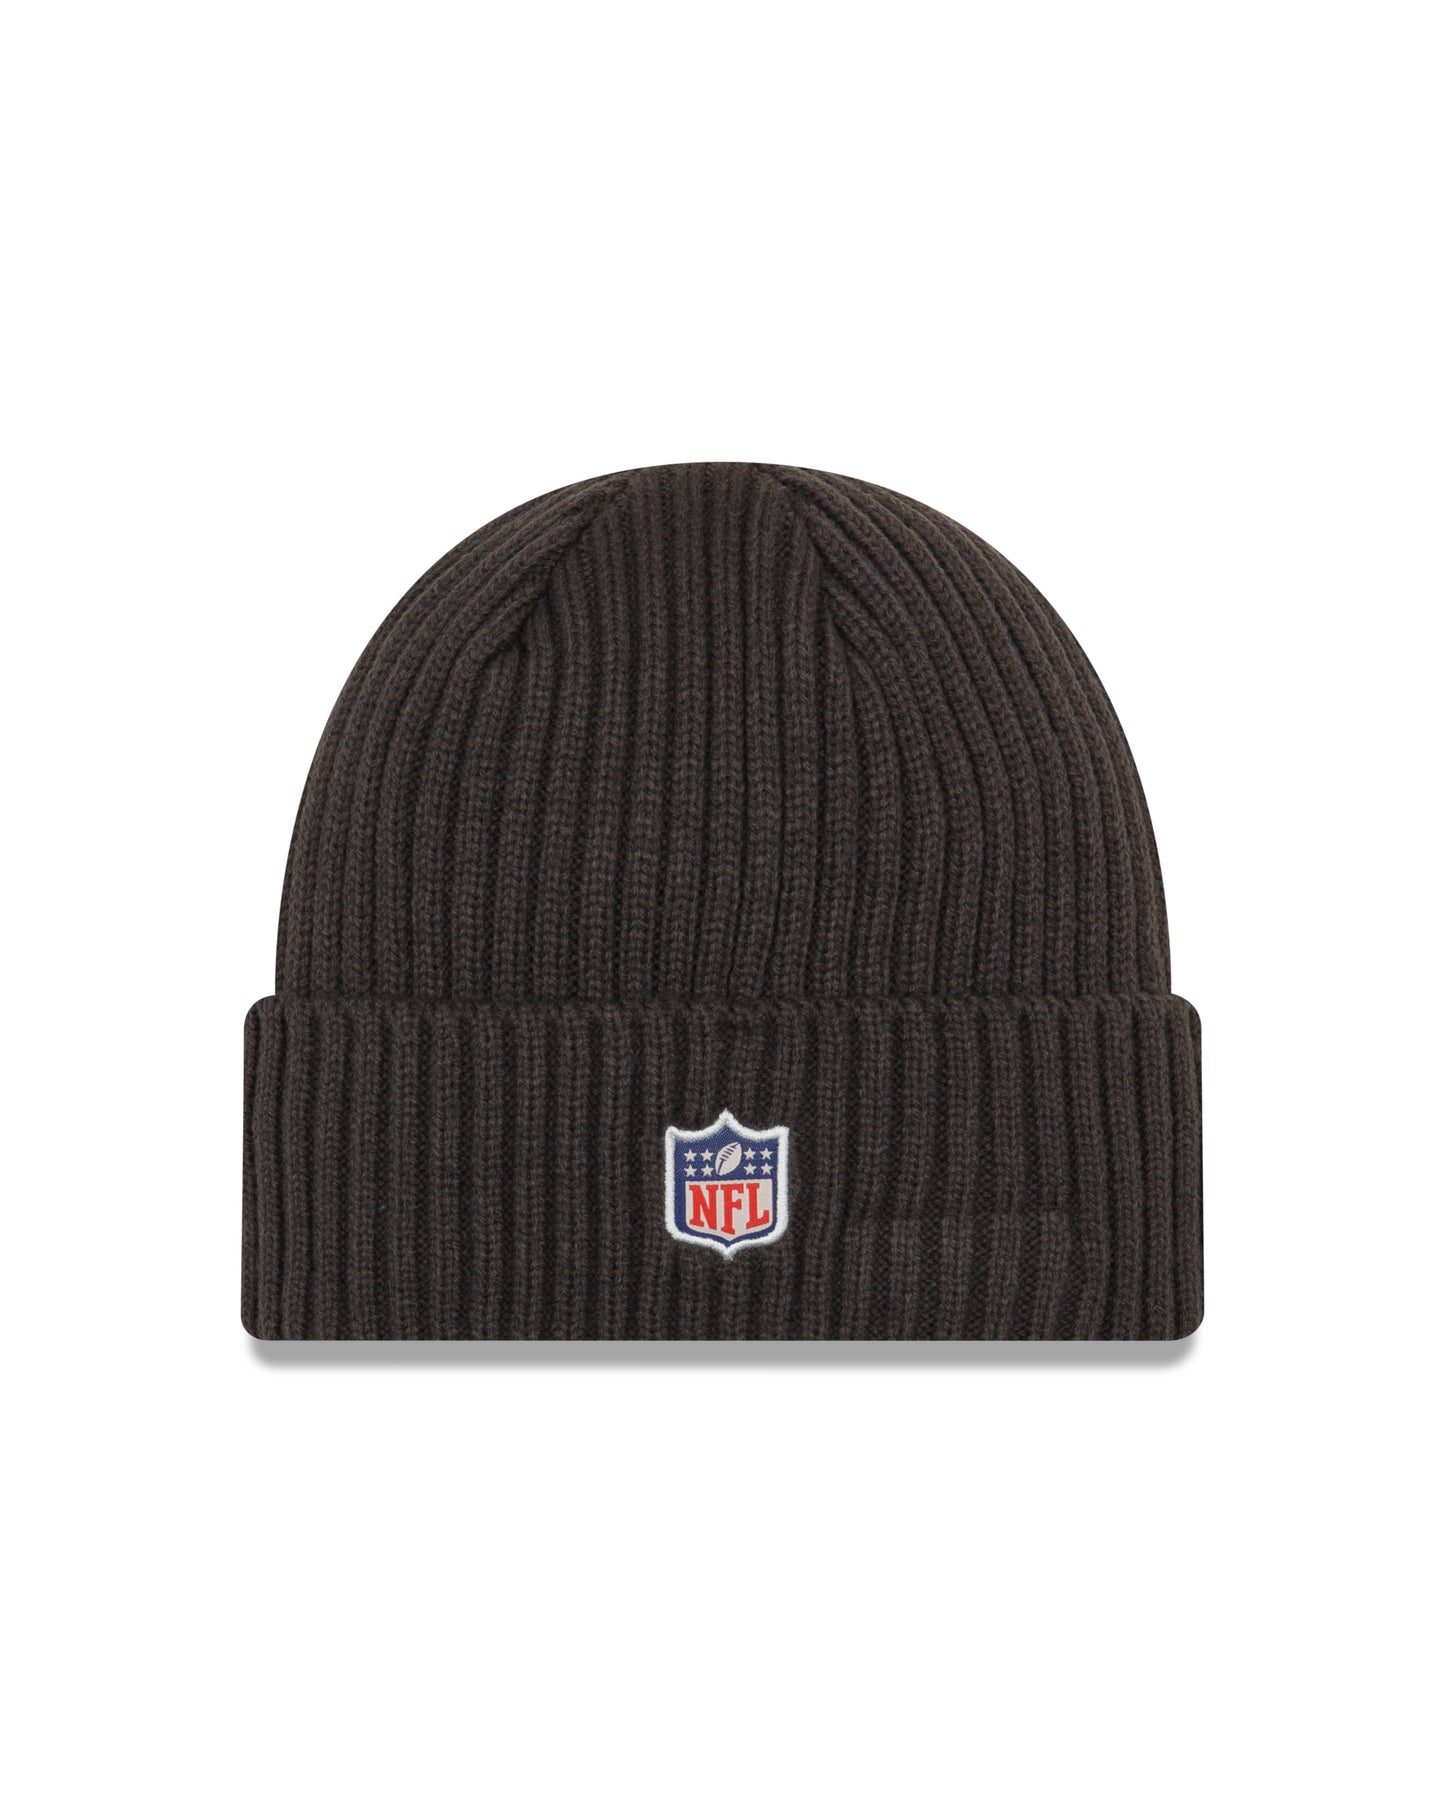 Indianapolis Colts New Era Crucial Catch Cuffed Knit Hat - Gray